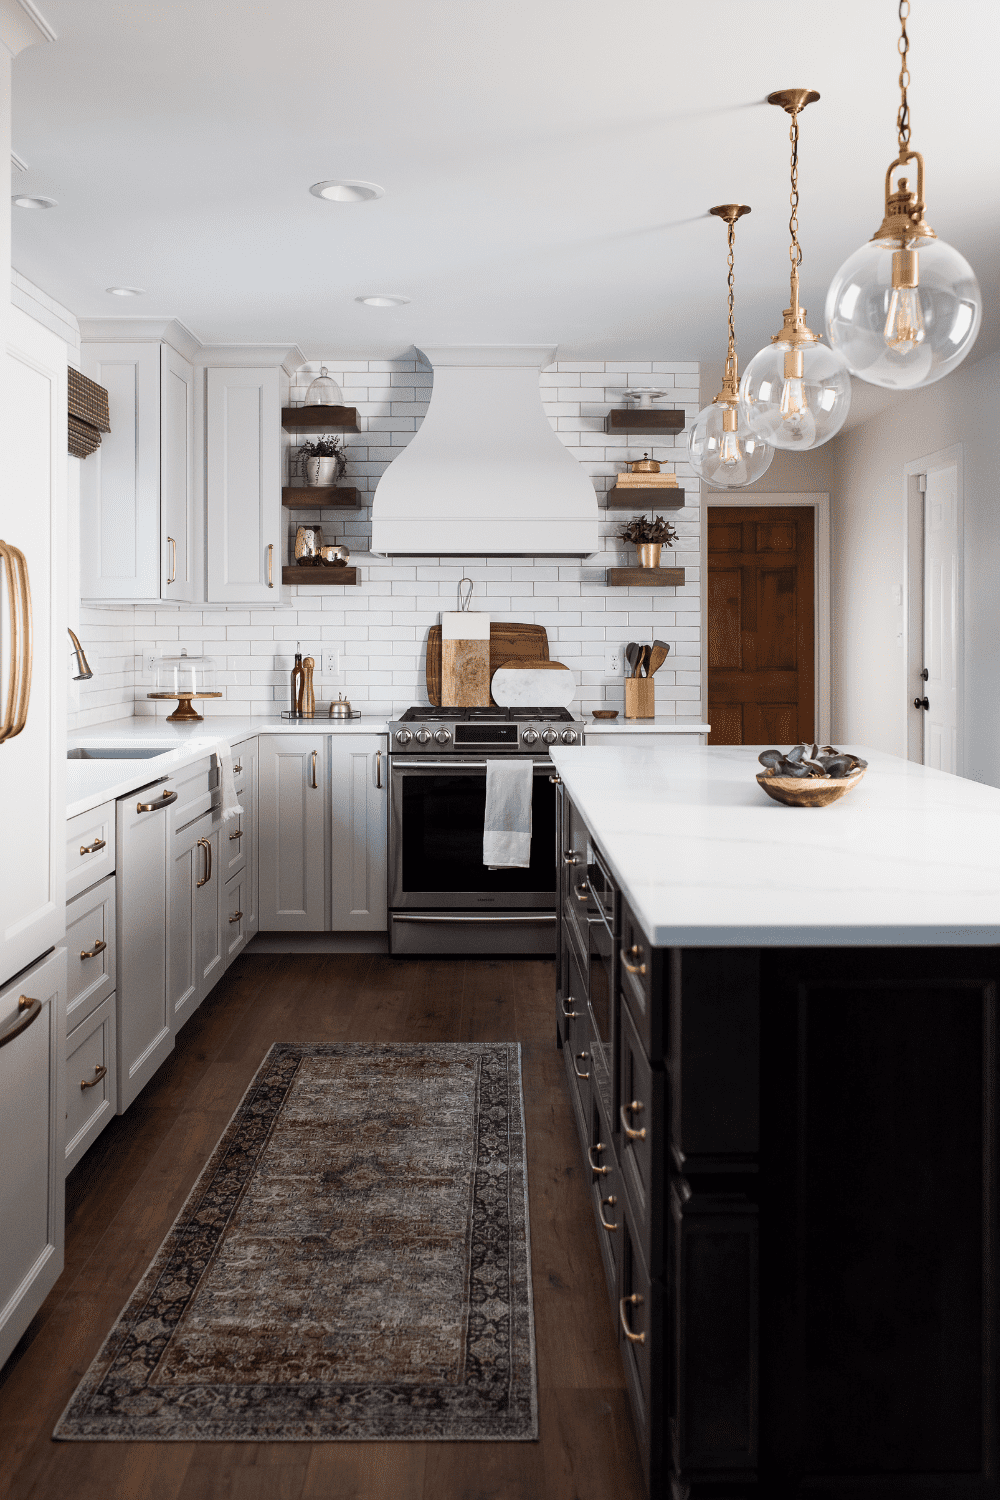 Nicholas Design Build | A neutral kitchen with a rug on the floor.